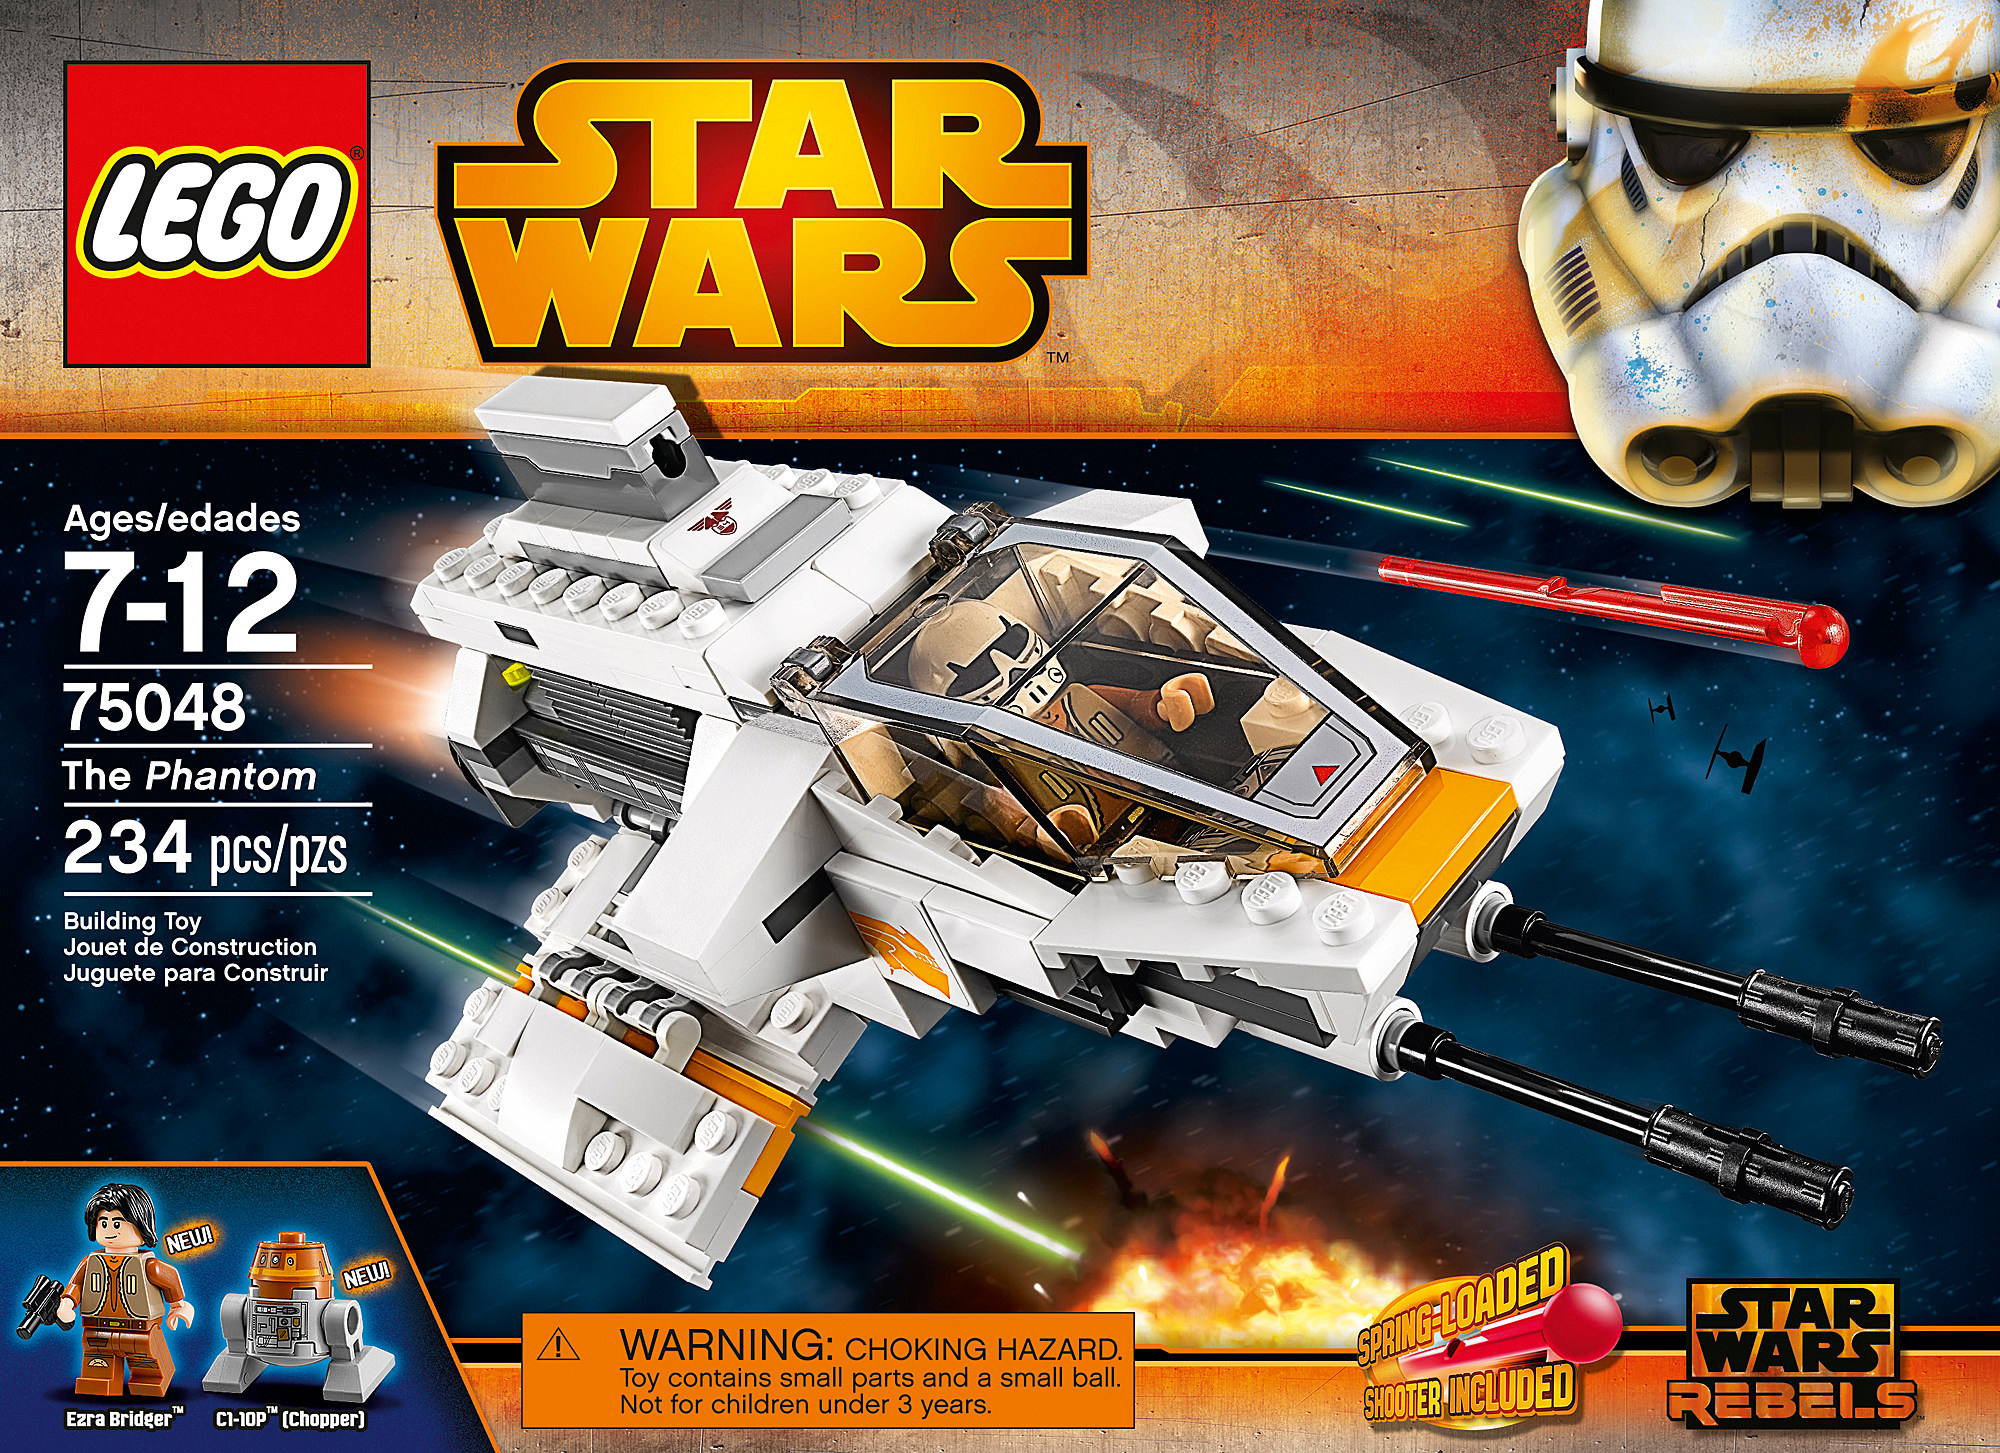 'star wars rebels' lego sets reveal new looks at the